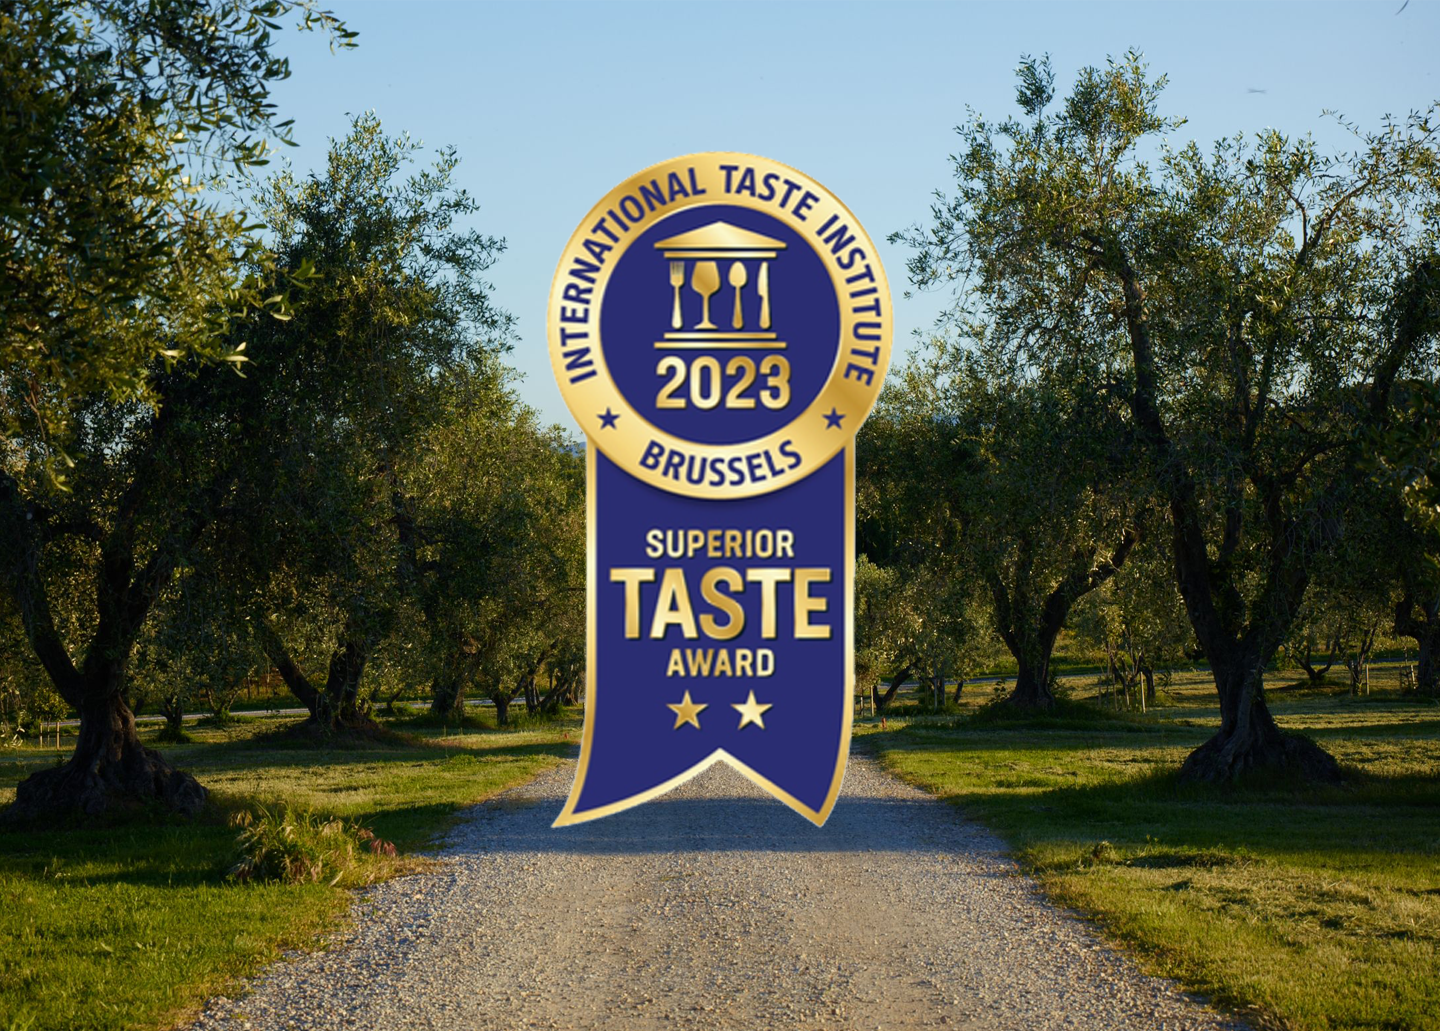 La Bandiera EVOO wins two gold stars for Superior Taste at the 2023 International Taste Institute Awards in Brussels